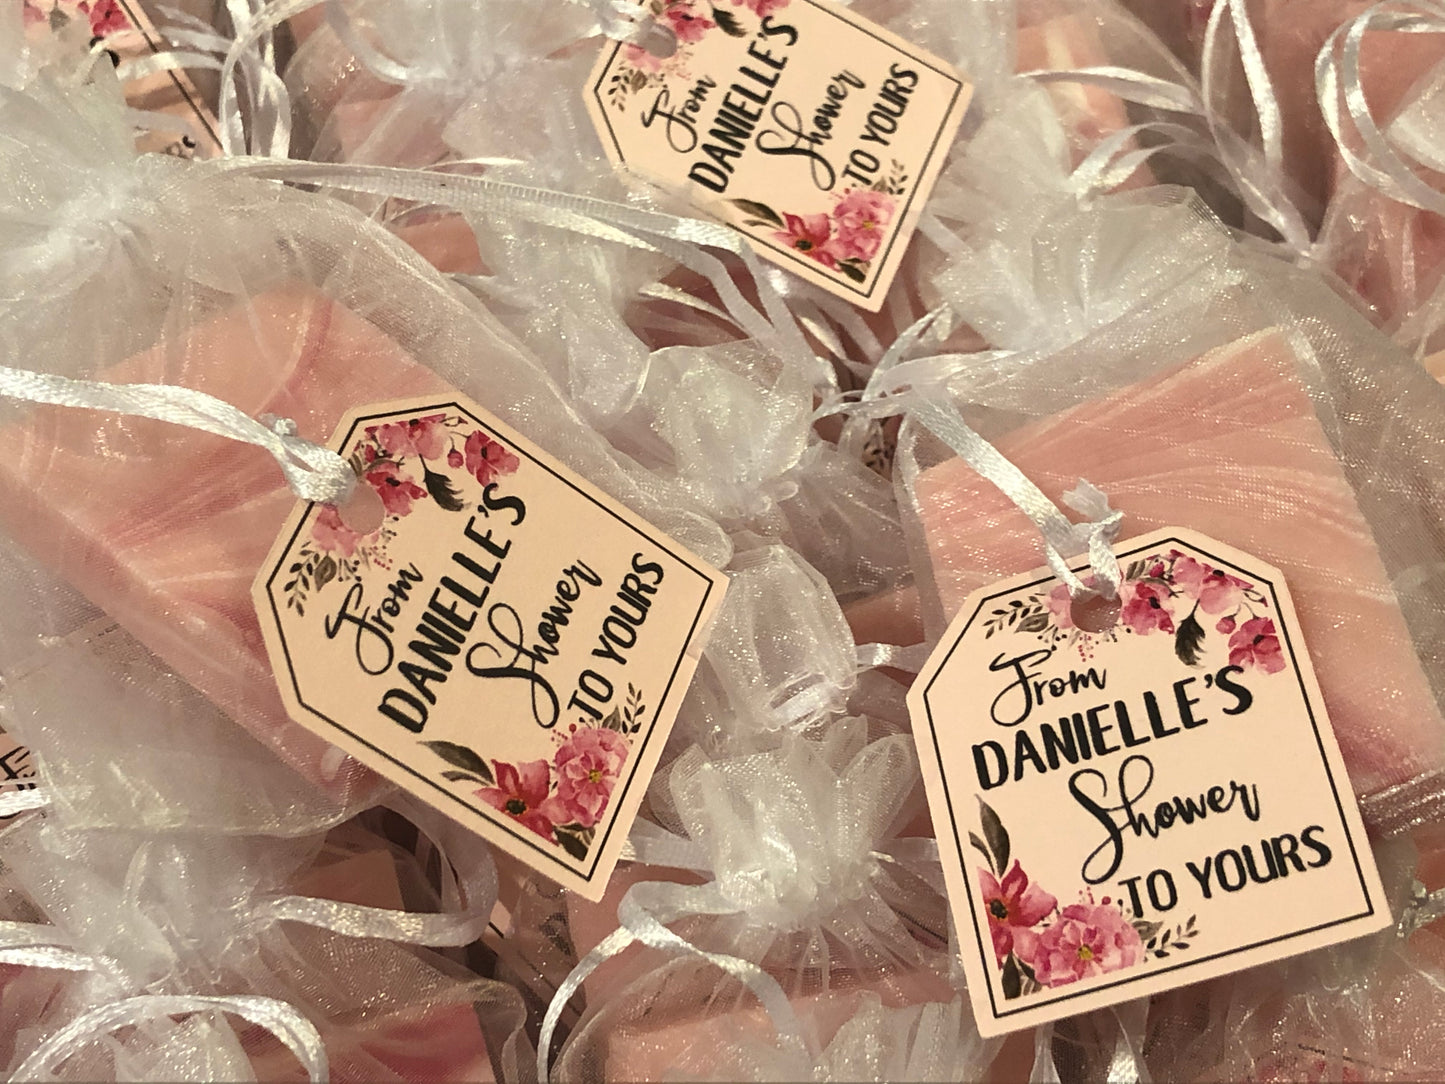 Mini soap shower favors in white mesh bags with pink floral tags